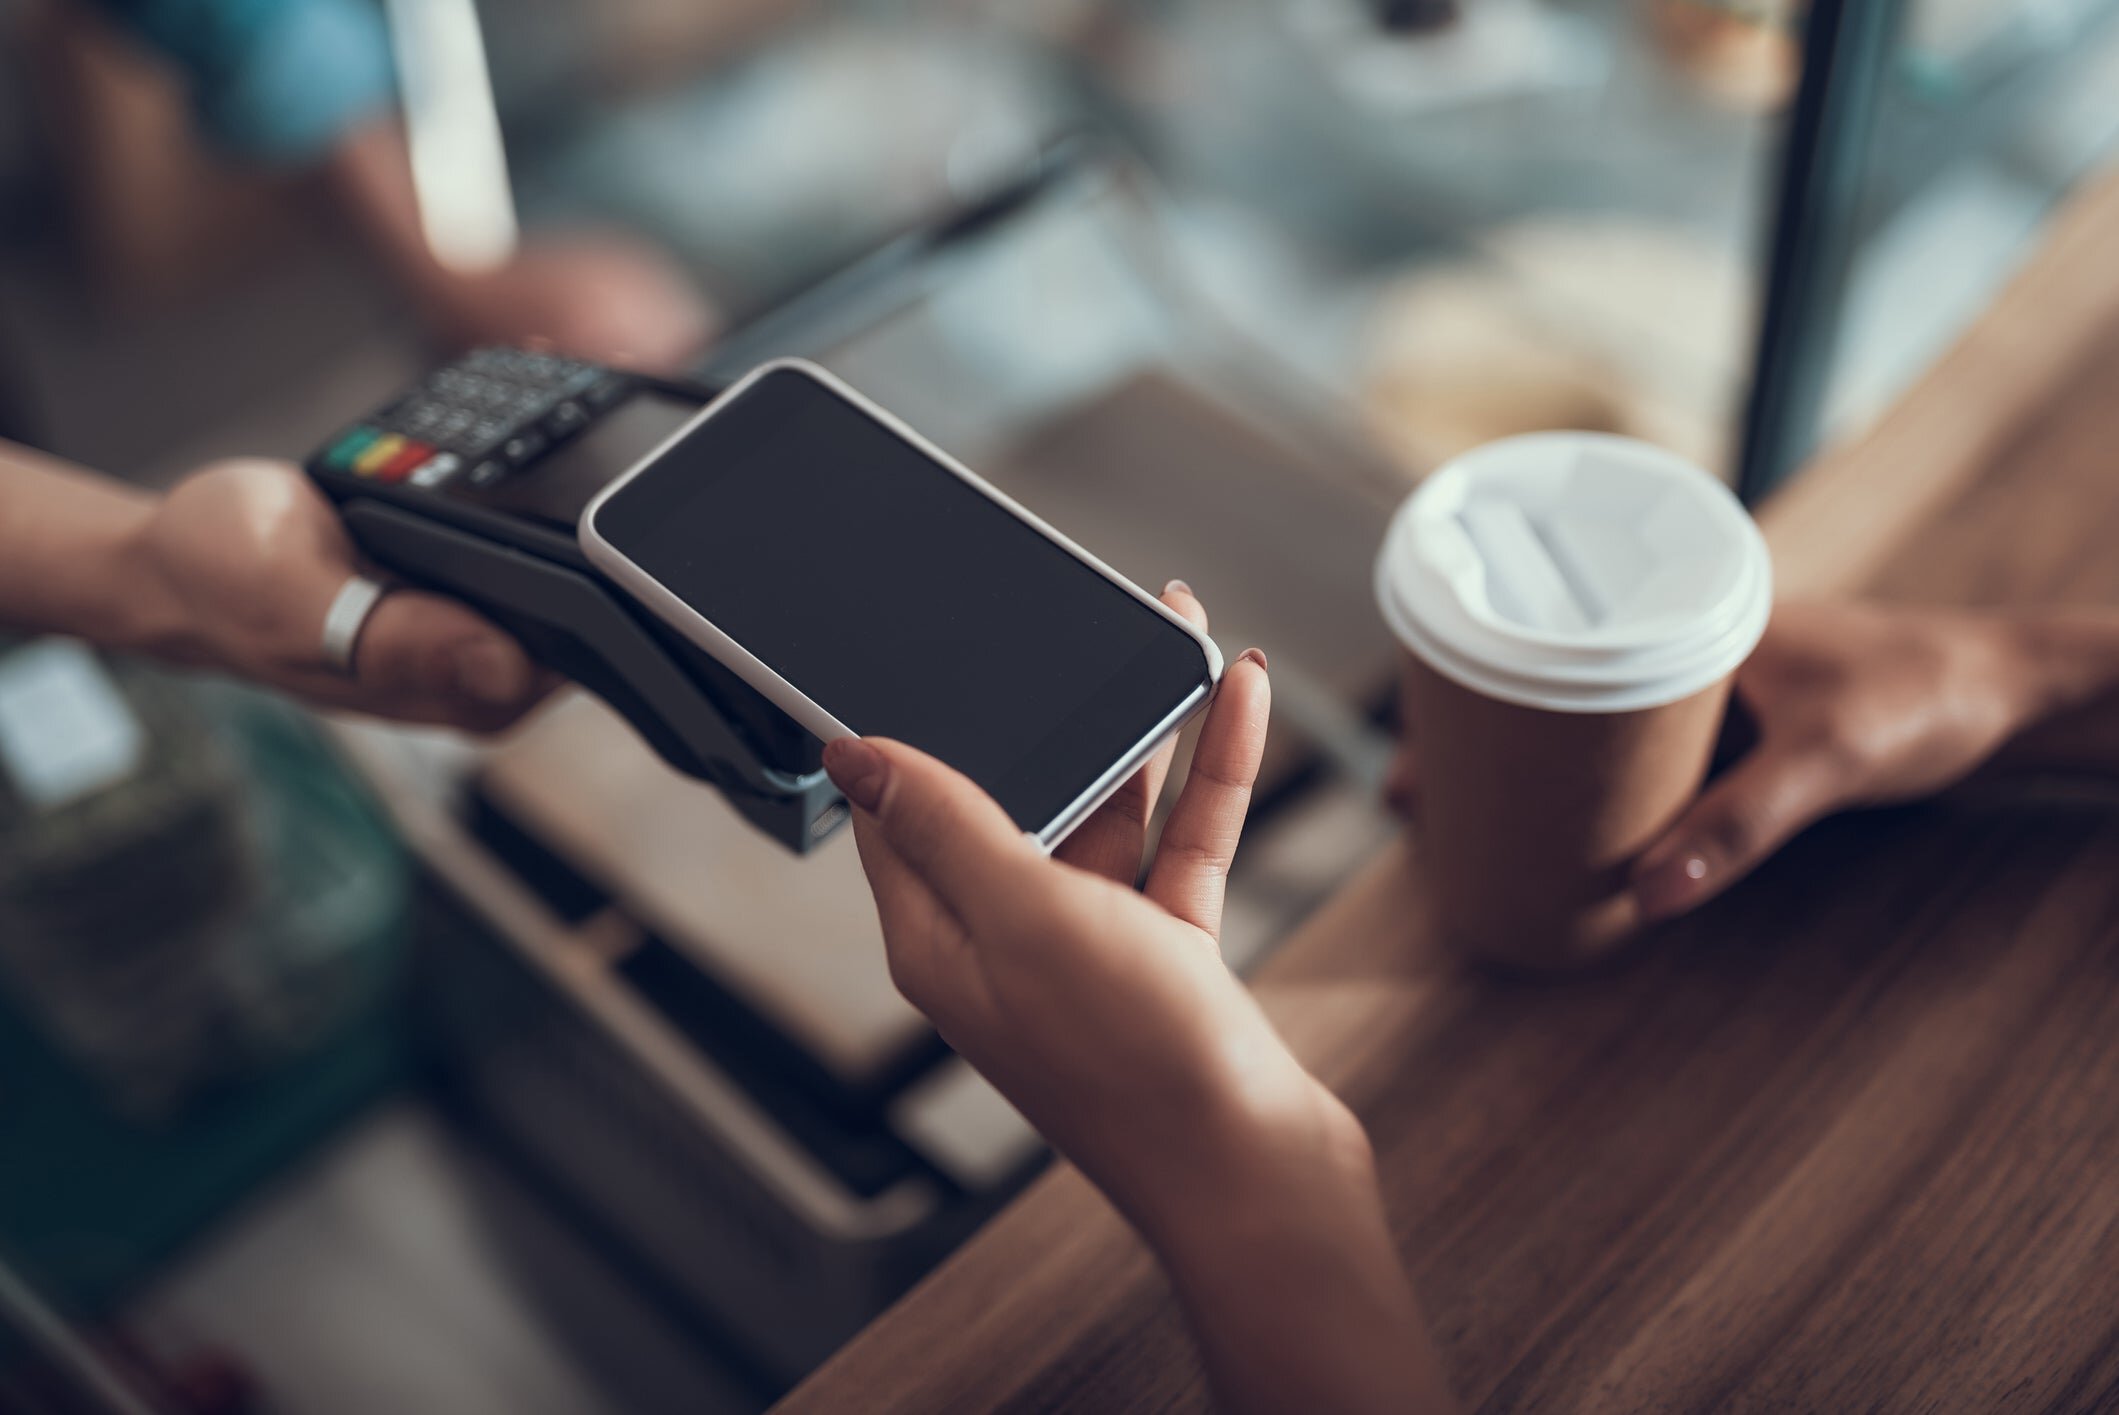 patron paying for coffe with contactless payment method